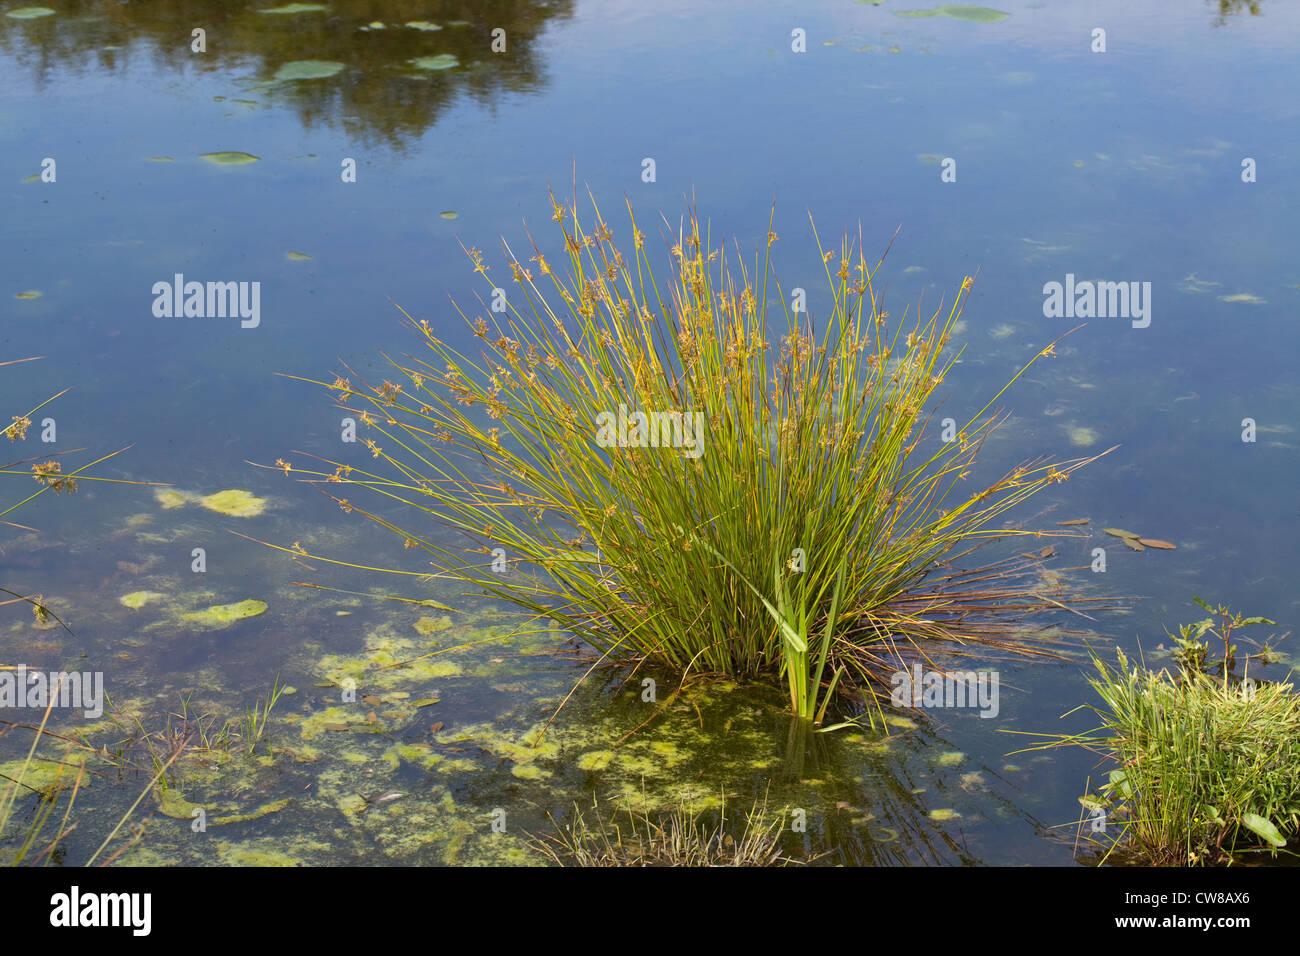 Common or Soft Rush (Juncus effusus). Plant in shallows of a natural field pond. Ingham, Norfolk. Note floating Blanket weed. Stock Photo